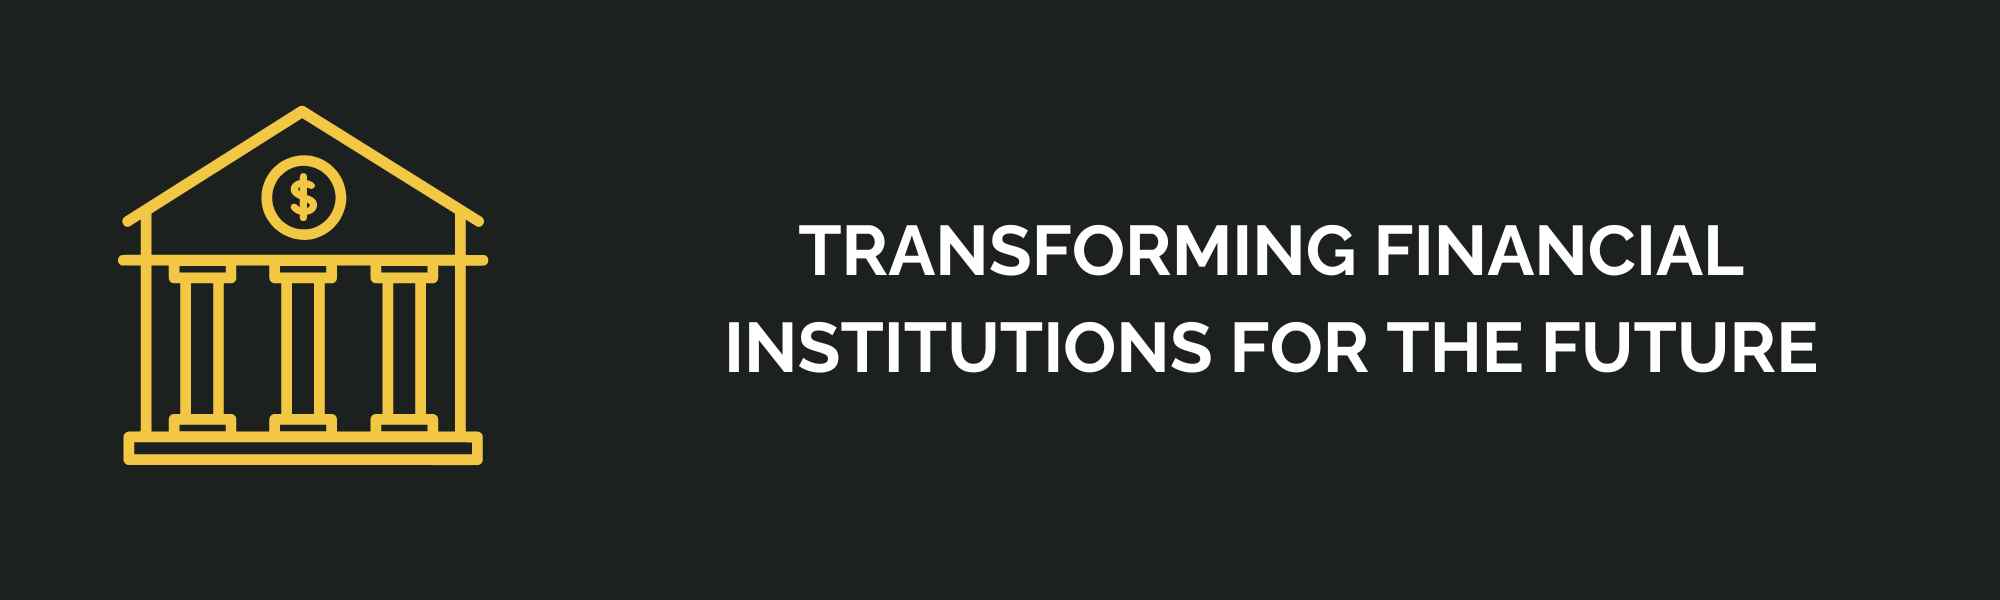 Transforming Financial Institutions for the Future